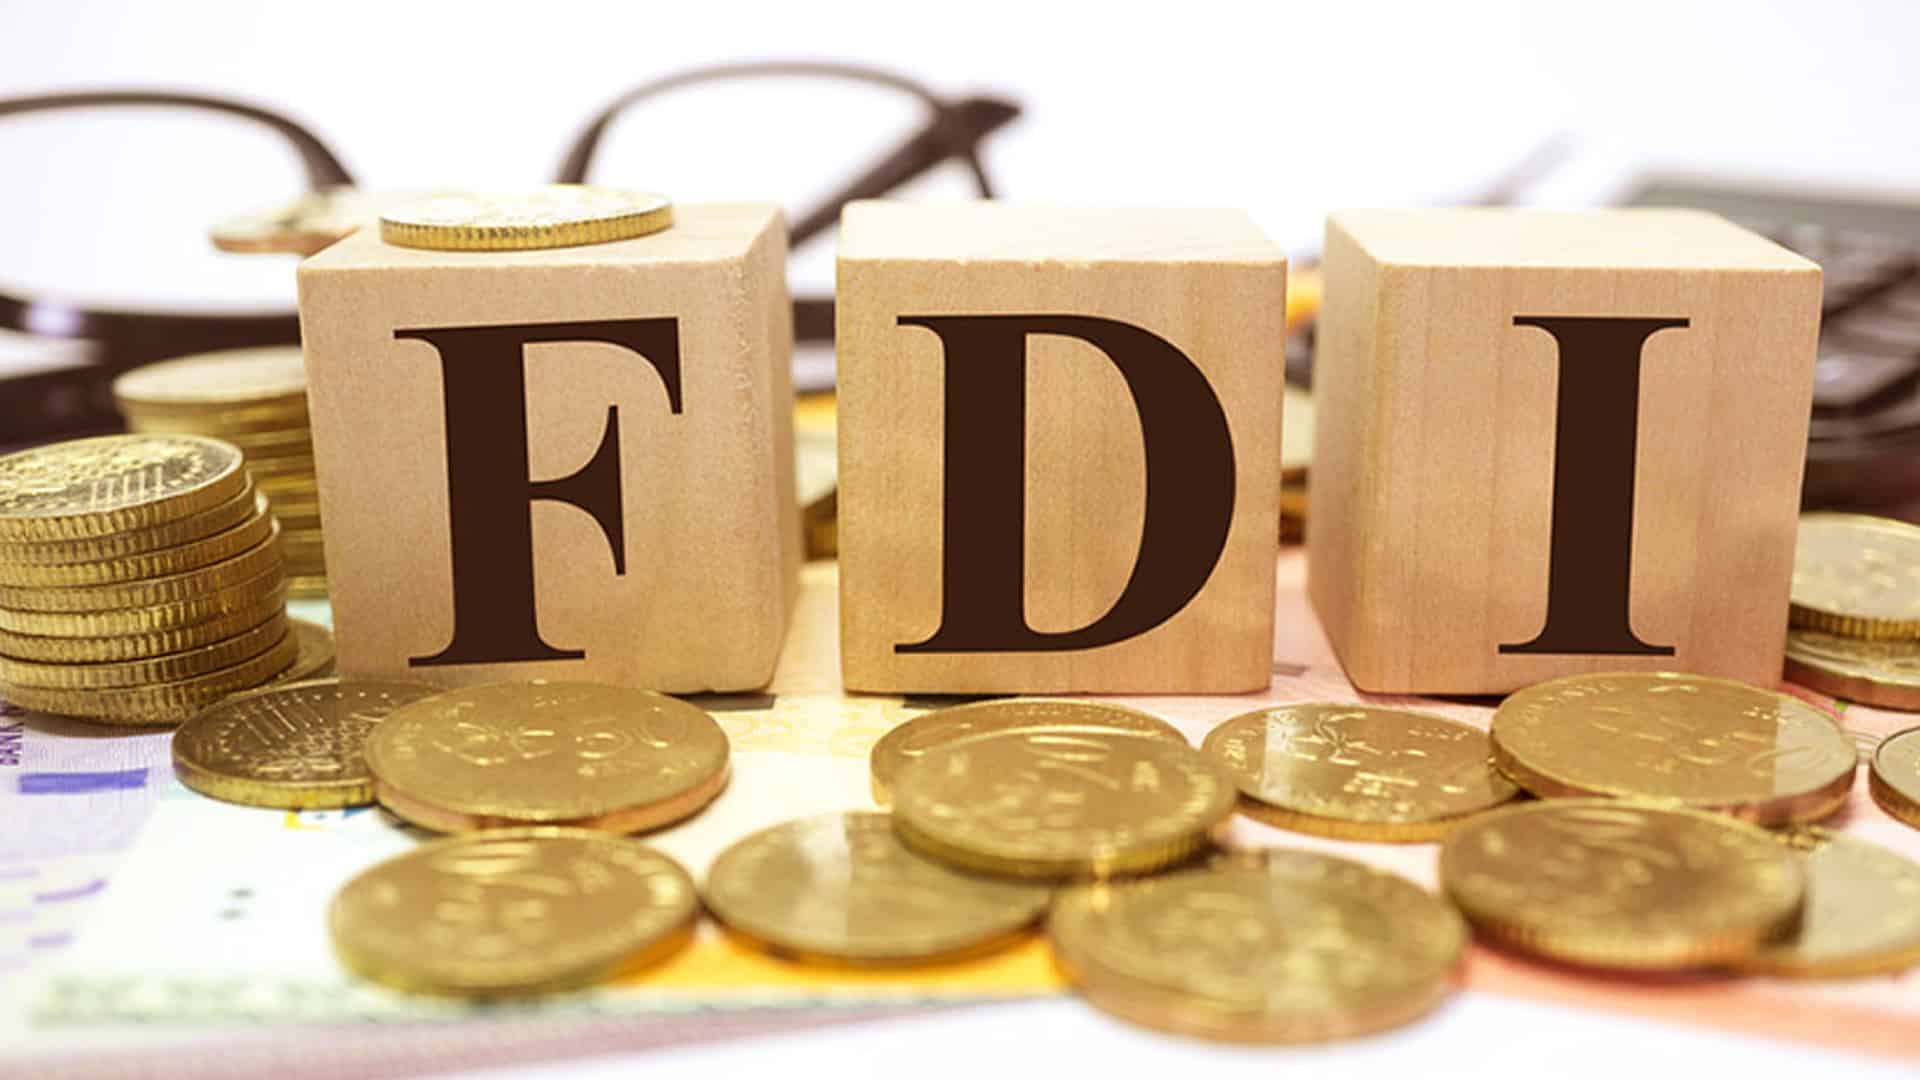 India has potential to attract USD 475 bn through FDI in 5 yrs: CII-EY report